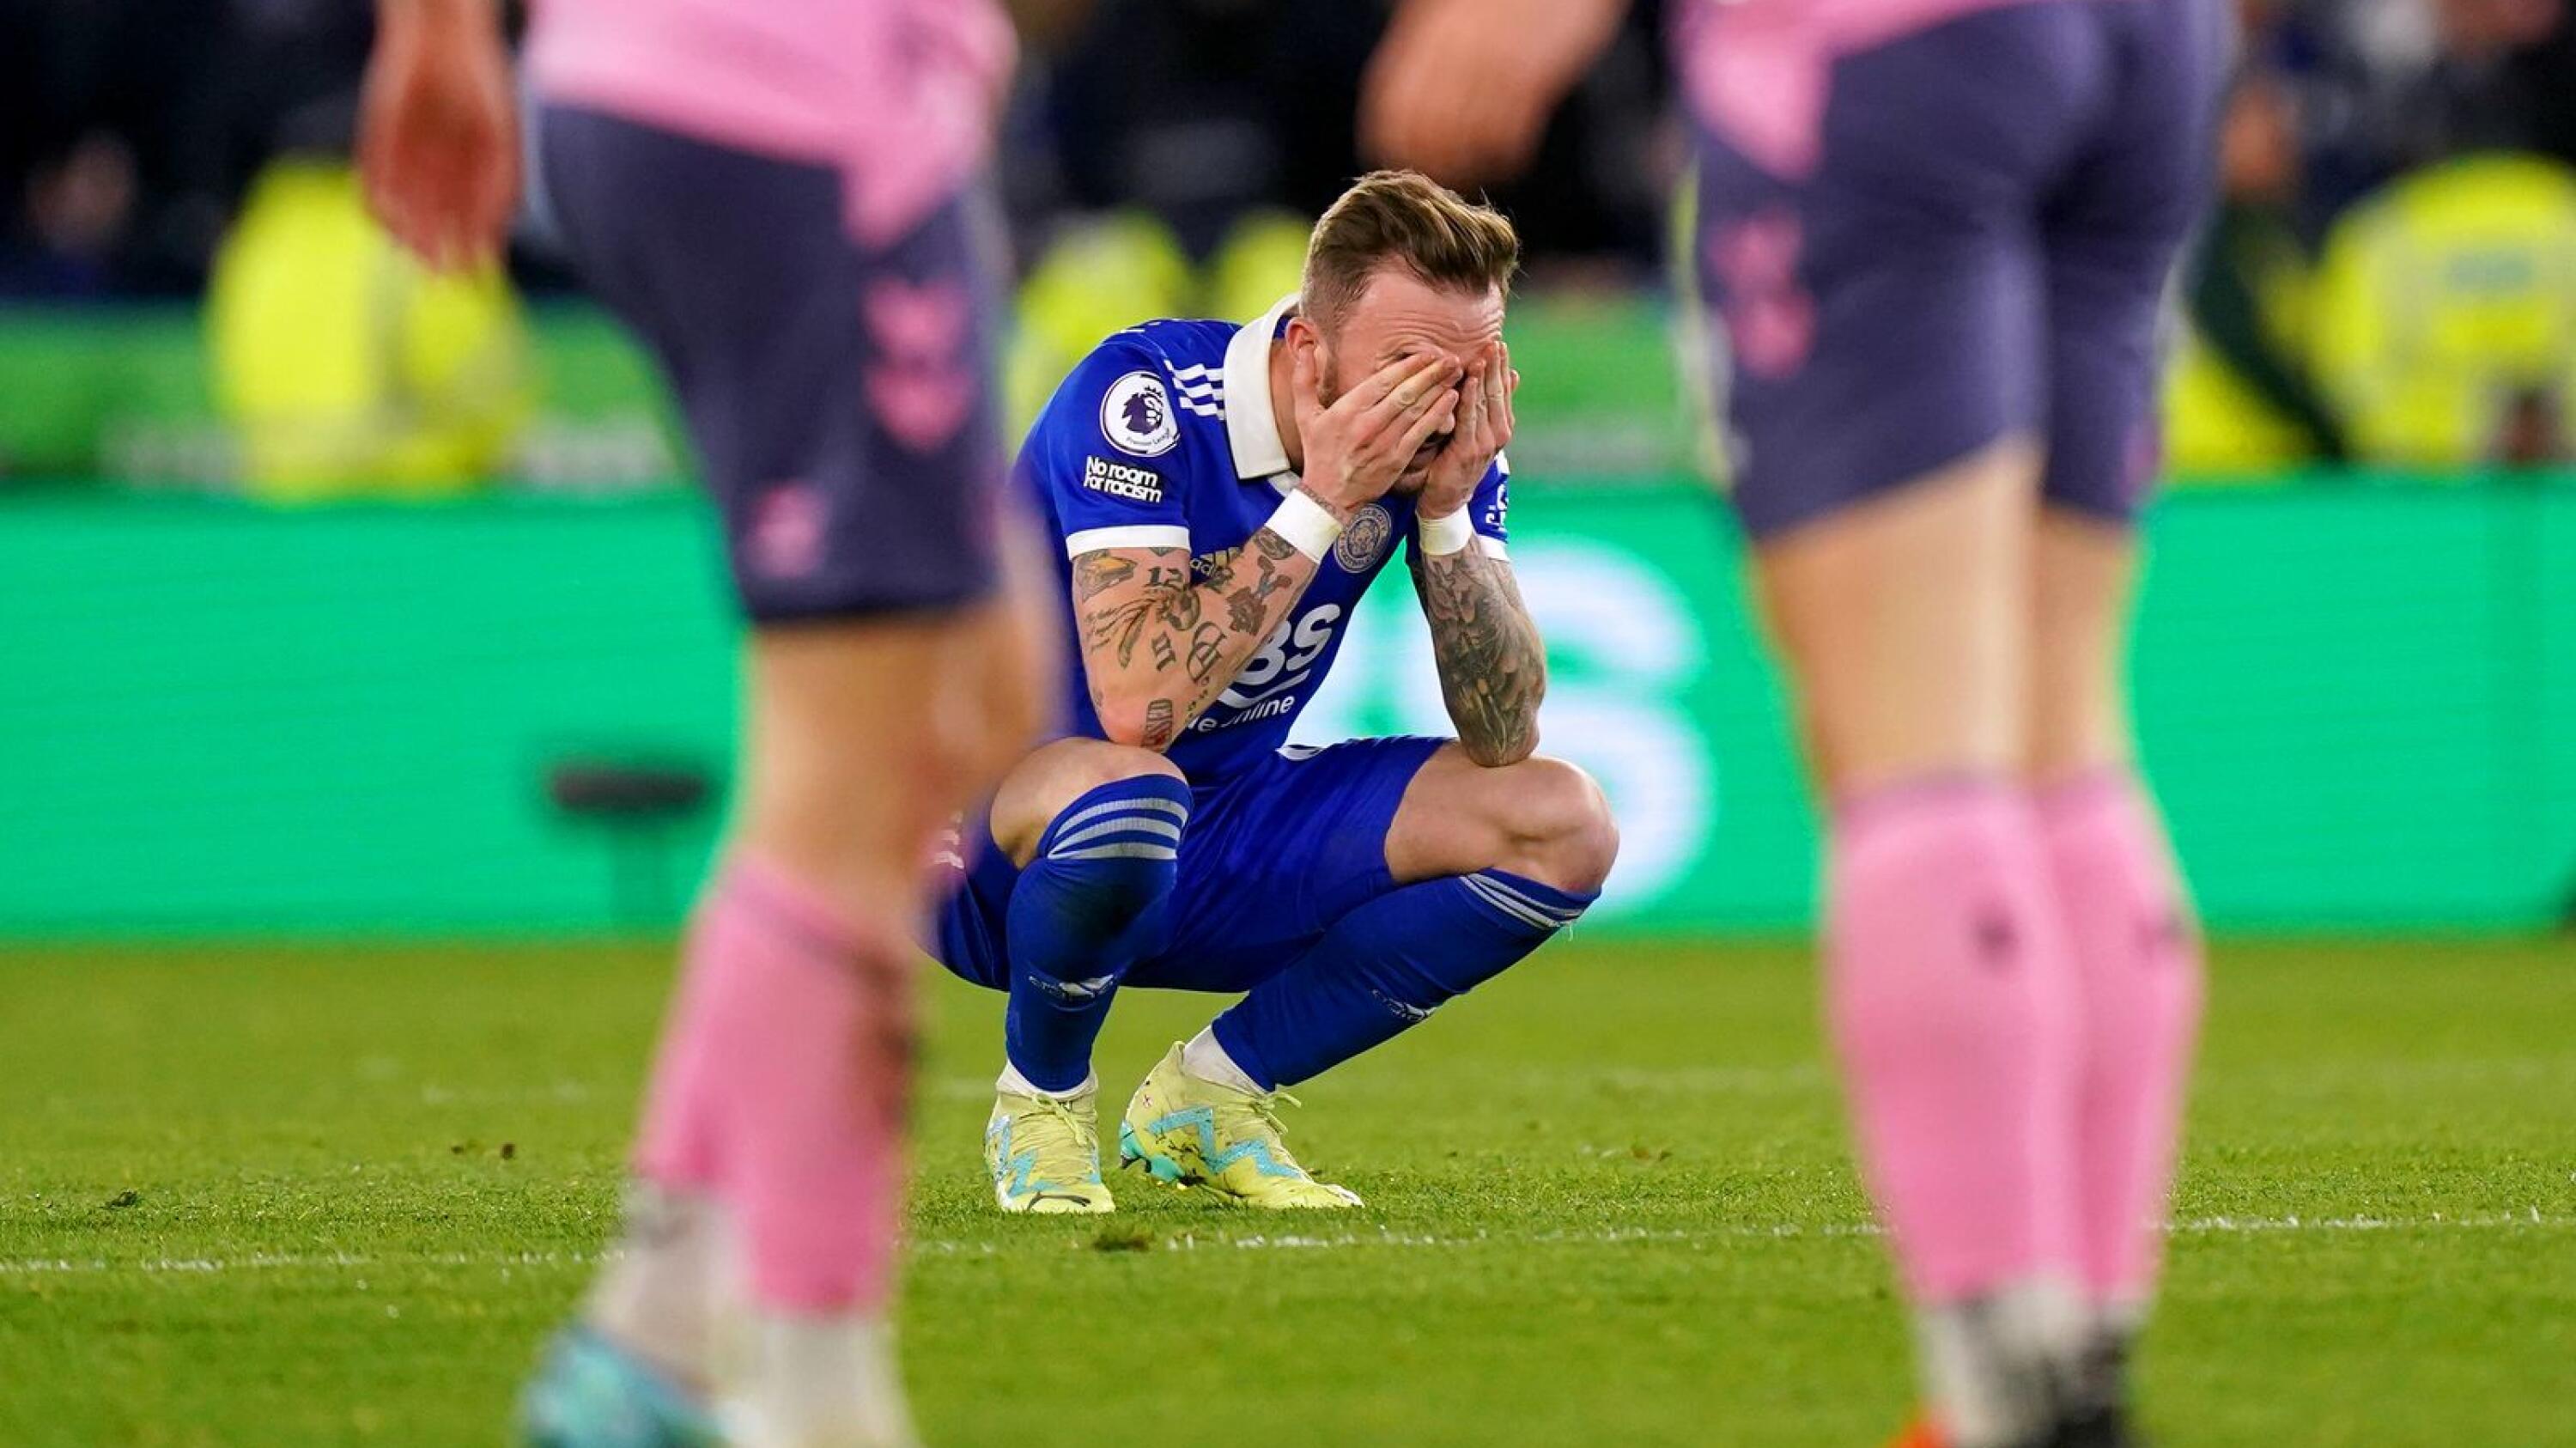 Leicester City's James Maddison appears dejected at the end of the Premier League match against Everton at the King Power Stadium